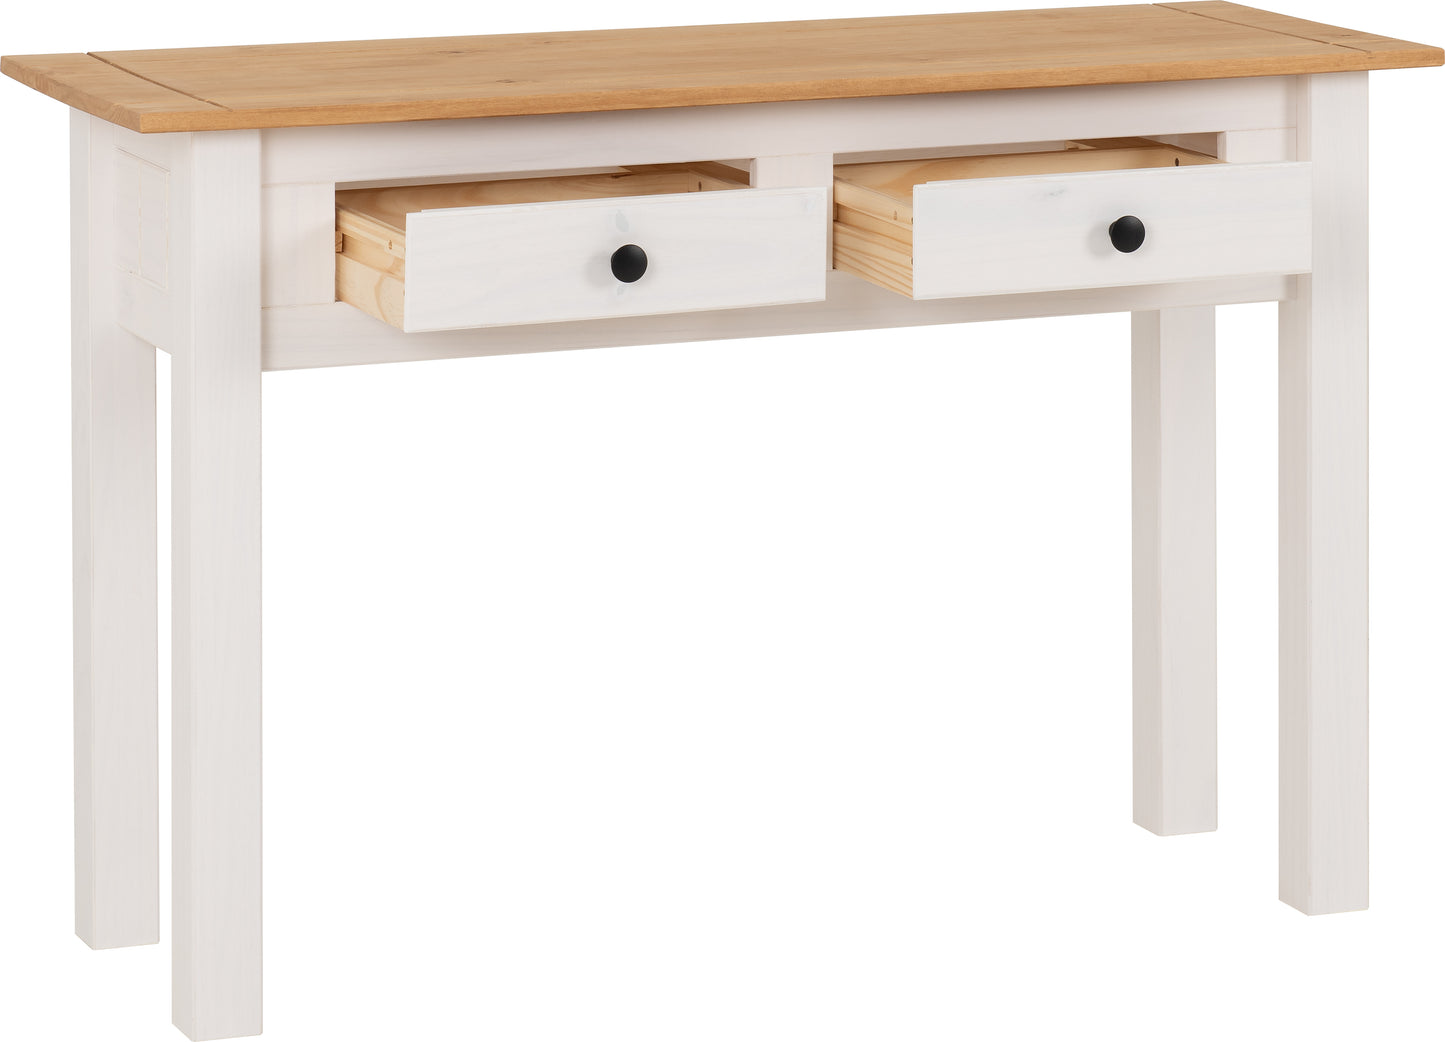 PANAMA 2 DRAWER CONSOLE TABLE - WHITE/NATURAL WAX